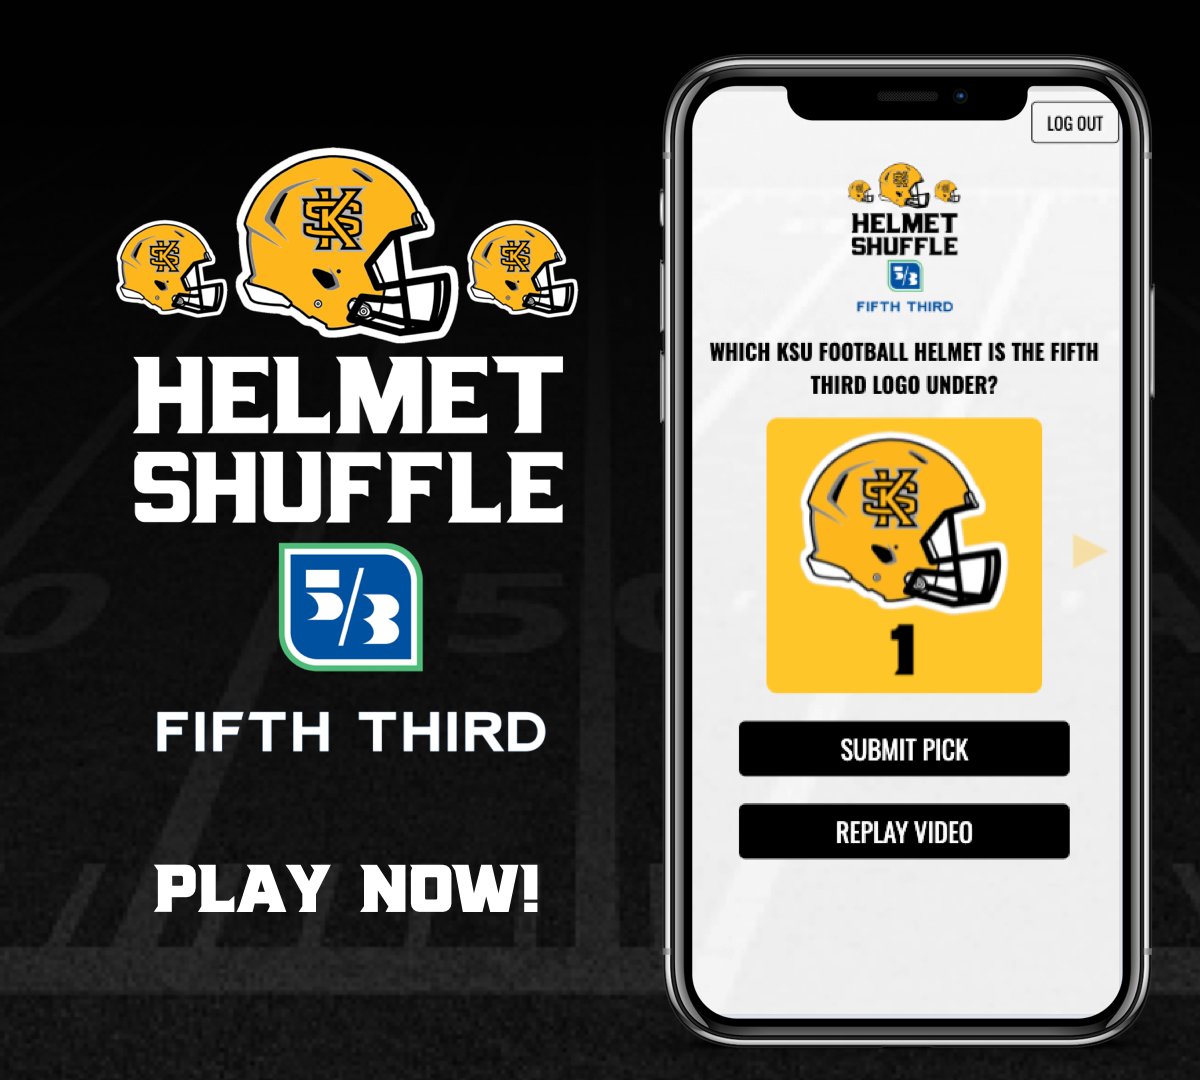 Are you up for an 🦉🏈 challenge? Play the new @FifthThird KSU Helmet Shuffle 𝗡𝗢𝗪 🔗 bit.ly/3W1hAHD #HootyHoo